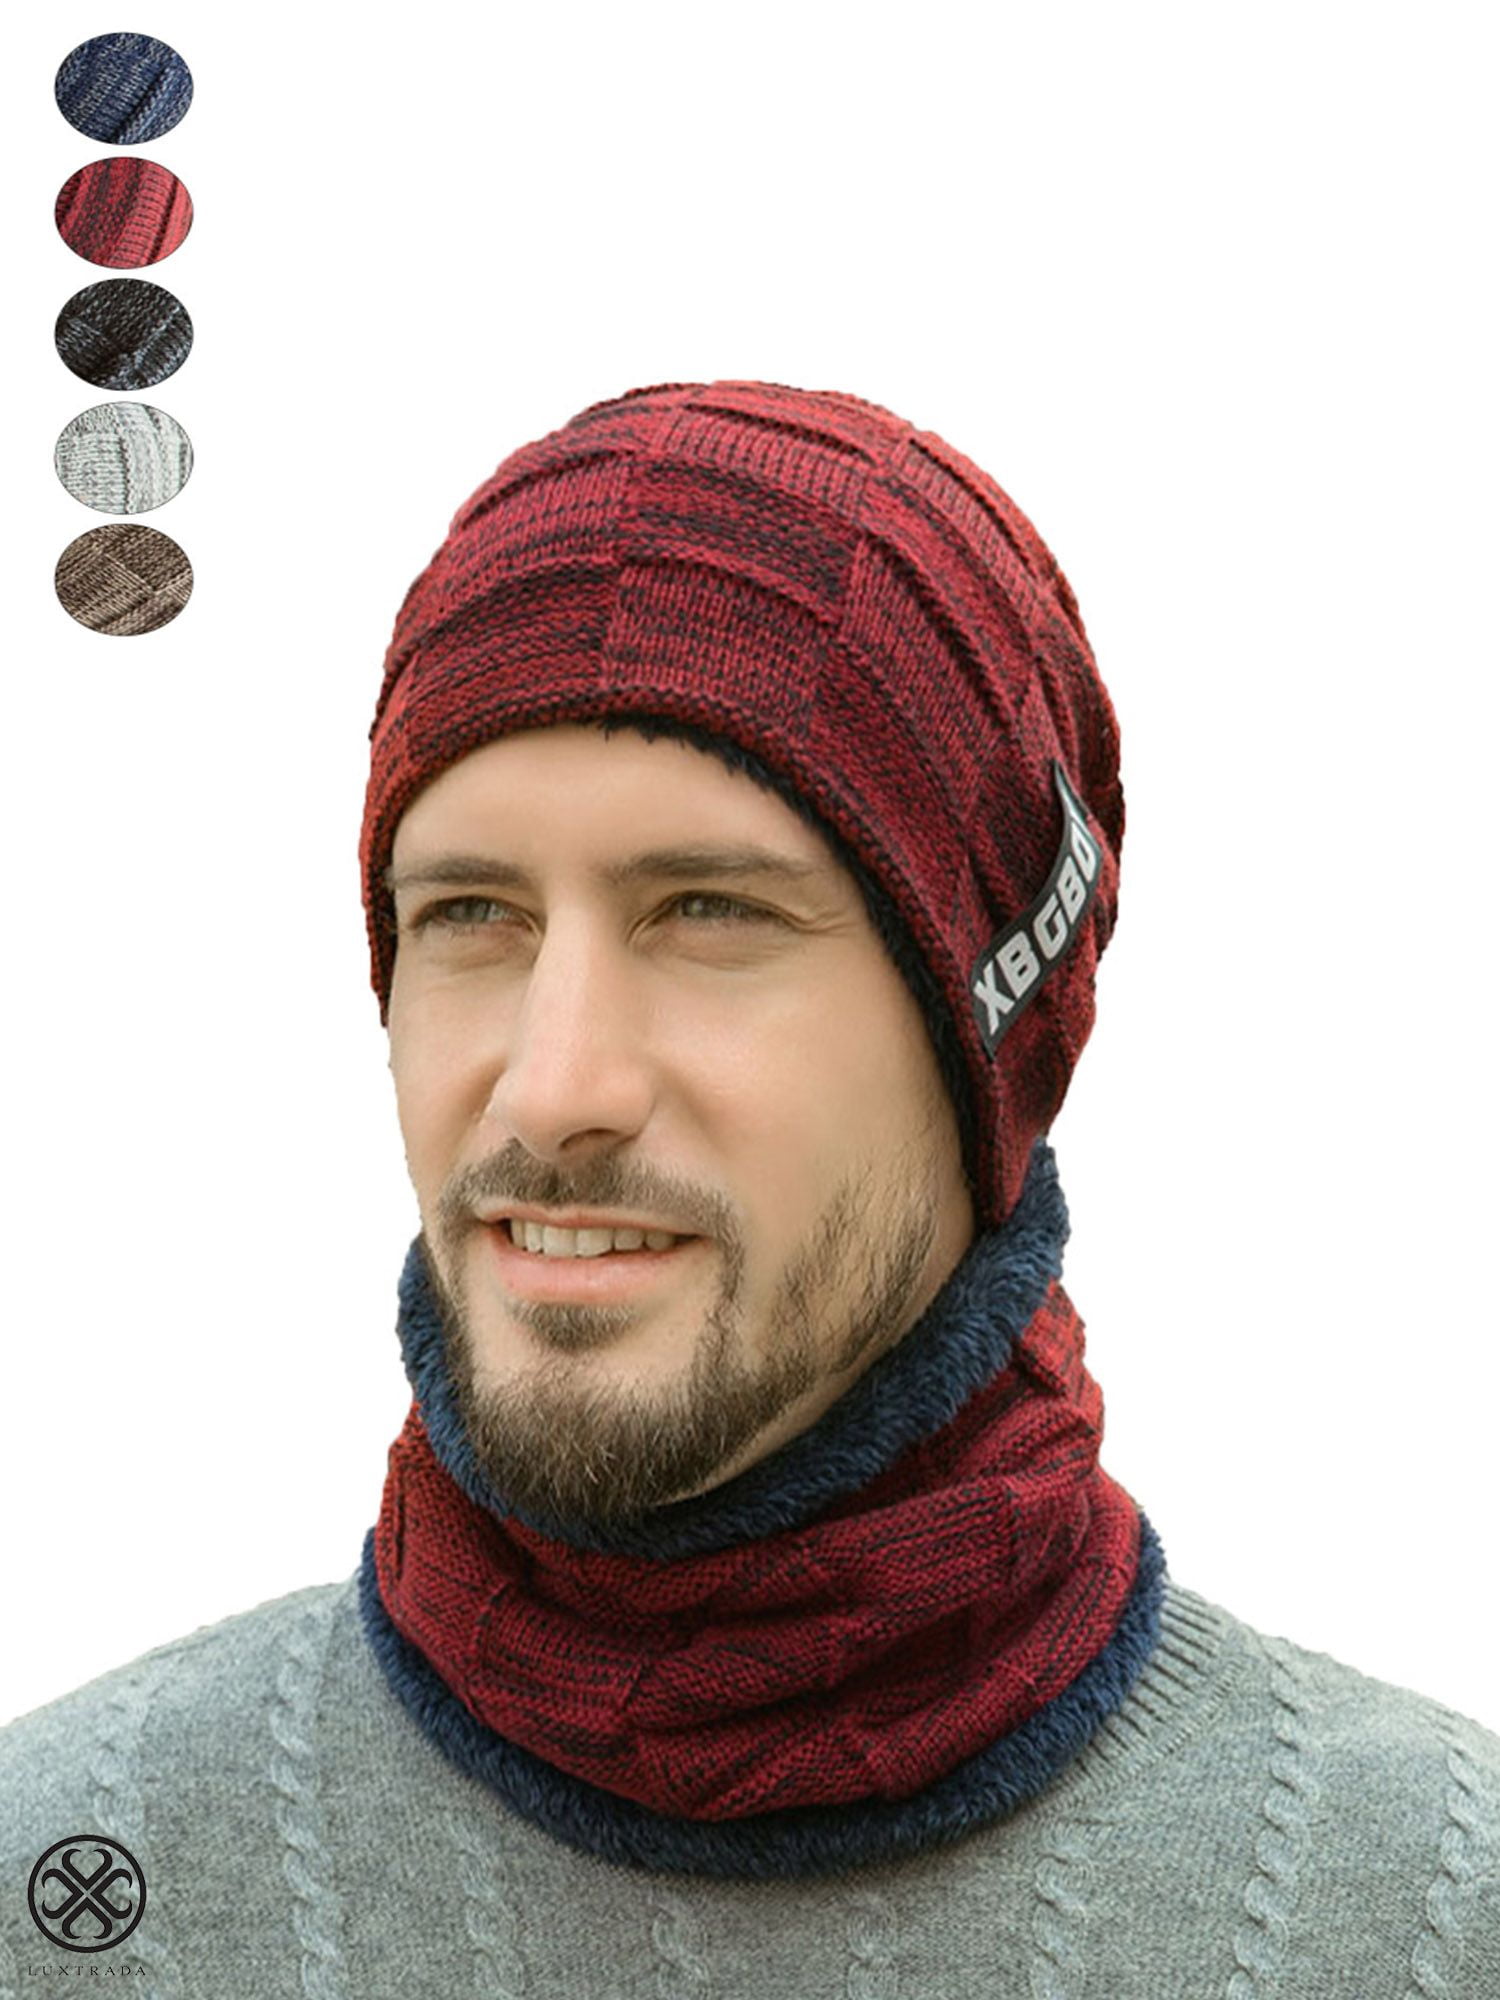 Winter Thermal Knitted Heanie Hat and Circle Scarf Set for Women/Men Warm Snood Suit for Men Indoors and Outdoor Sports 